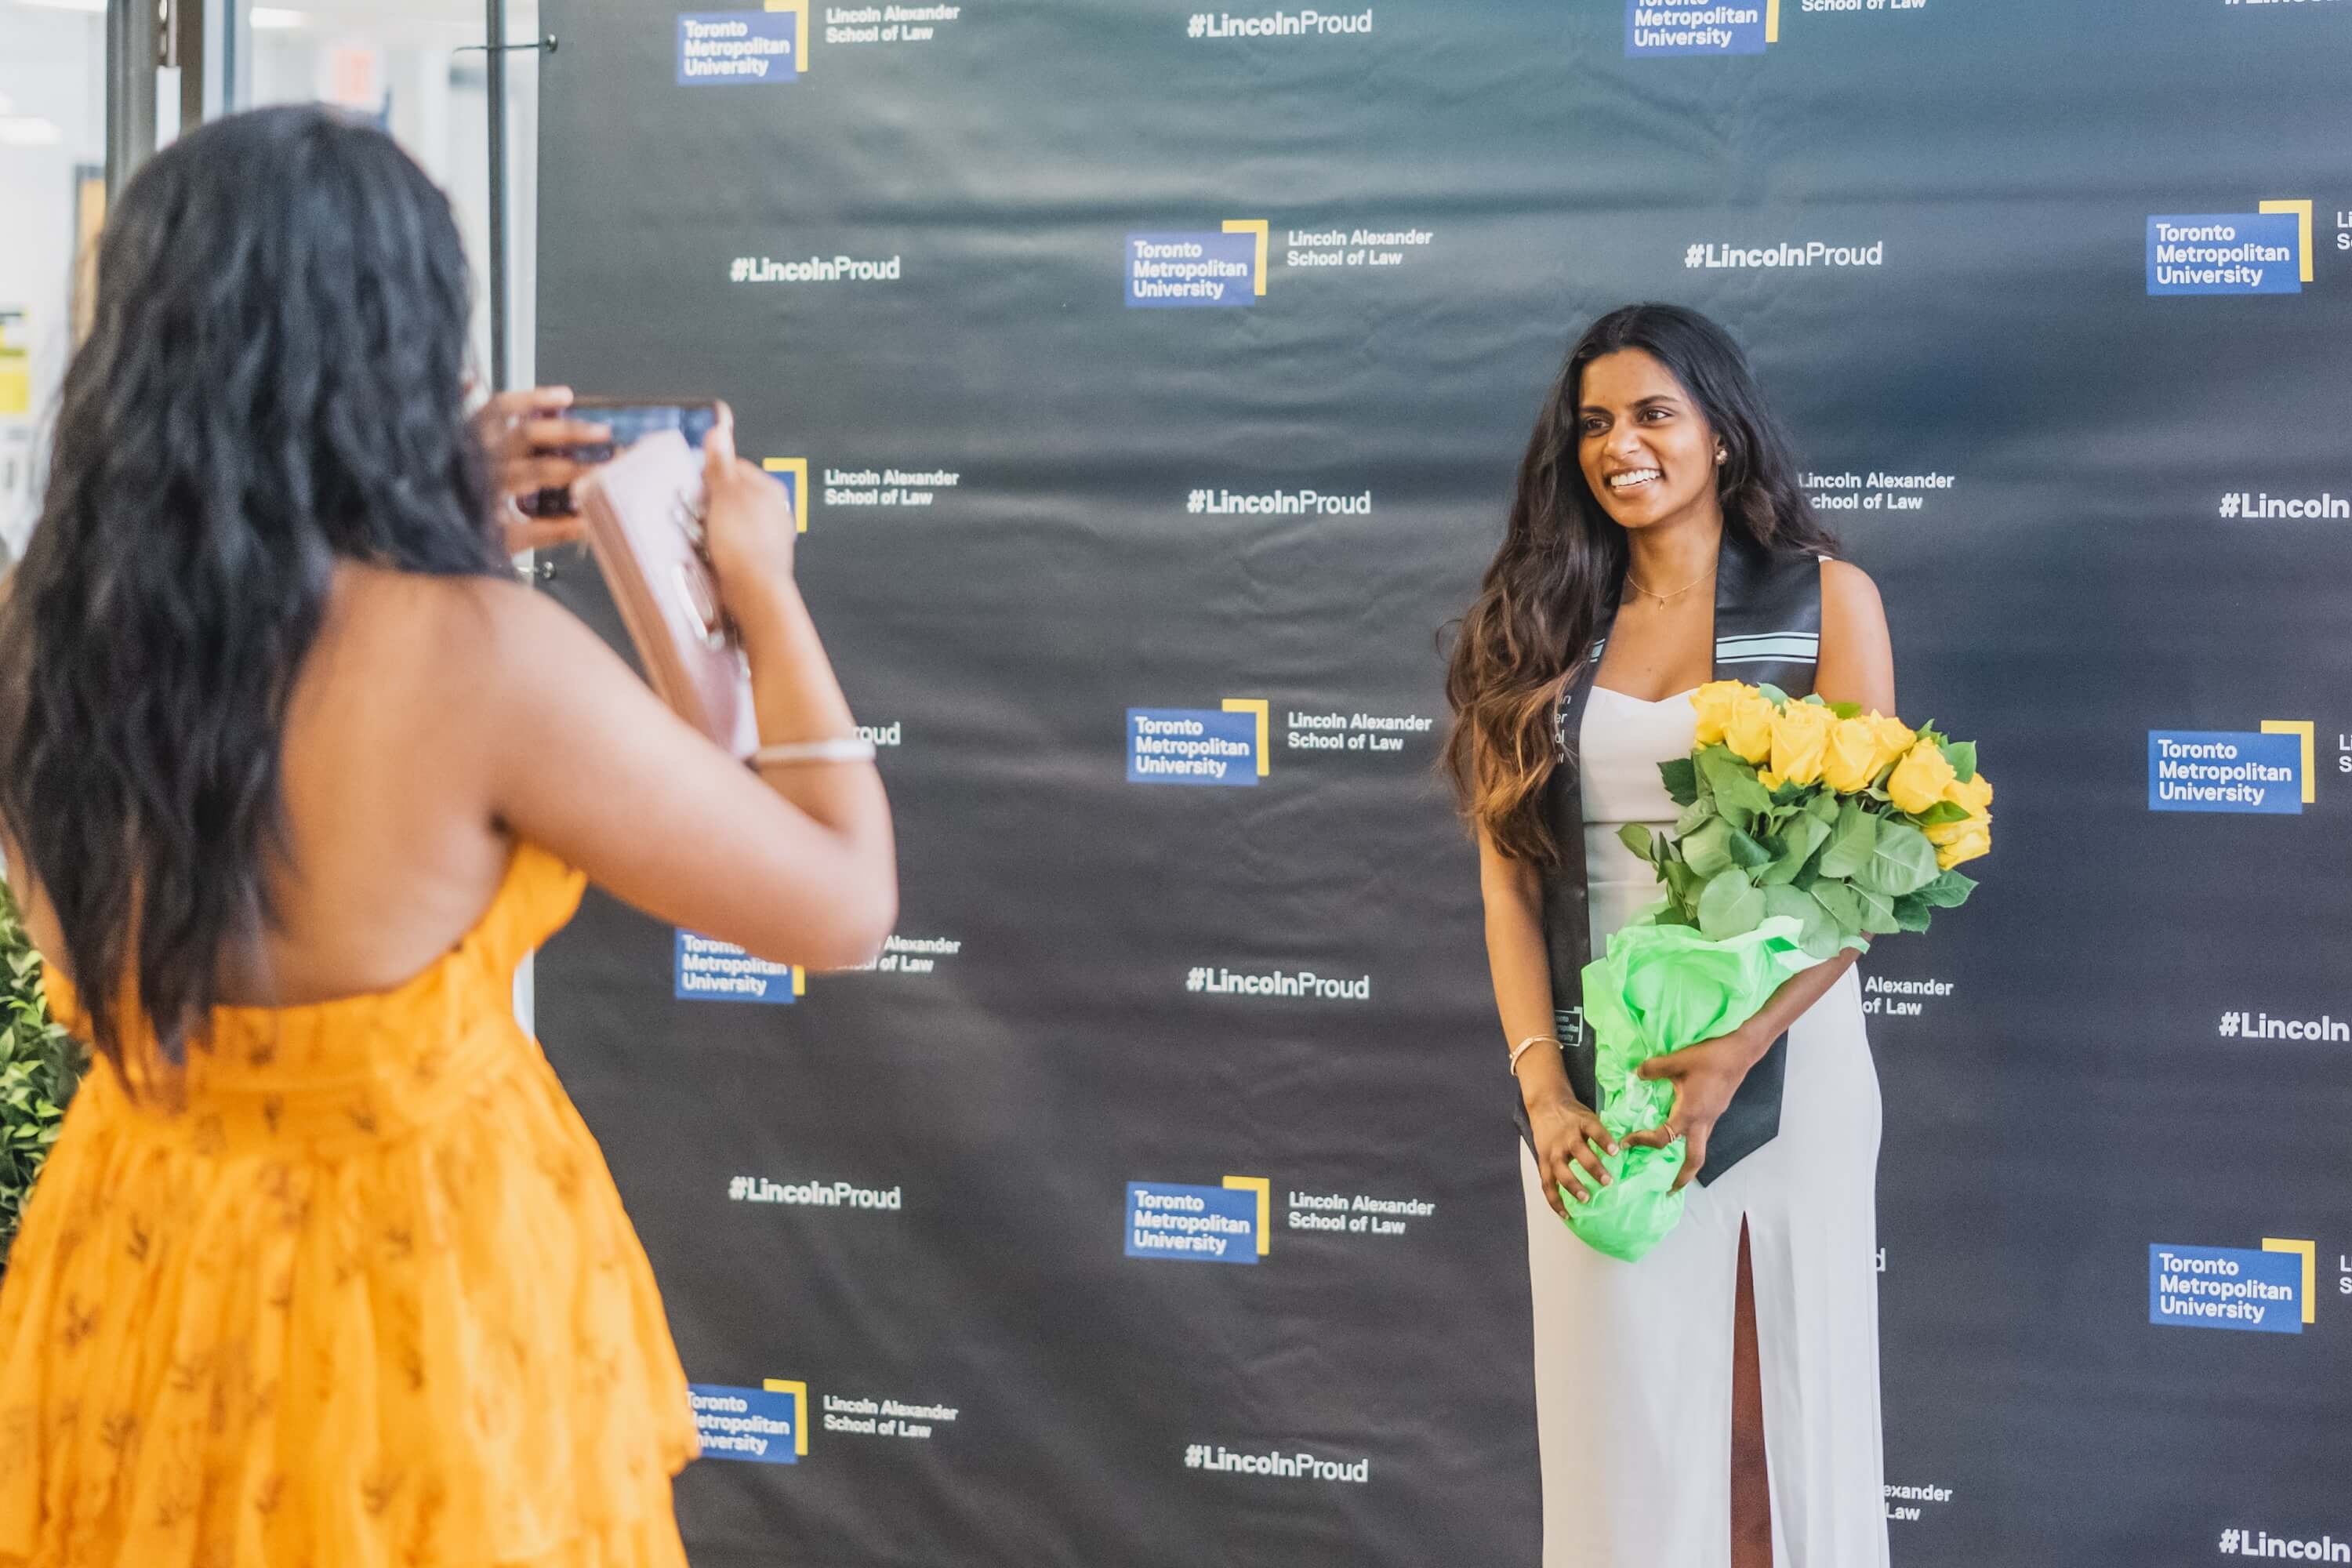 A young woman posing with yellow roses in front of a backdrop while another woman takes her photo.